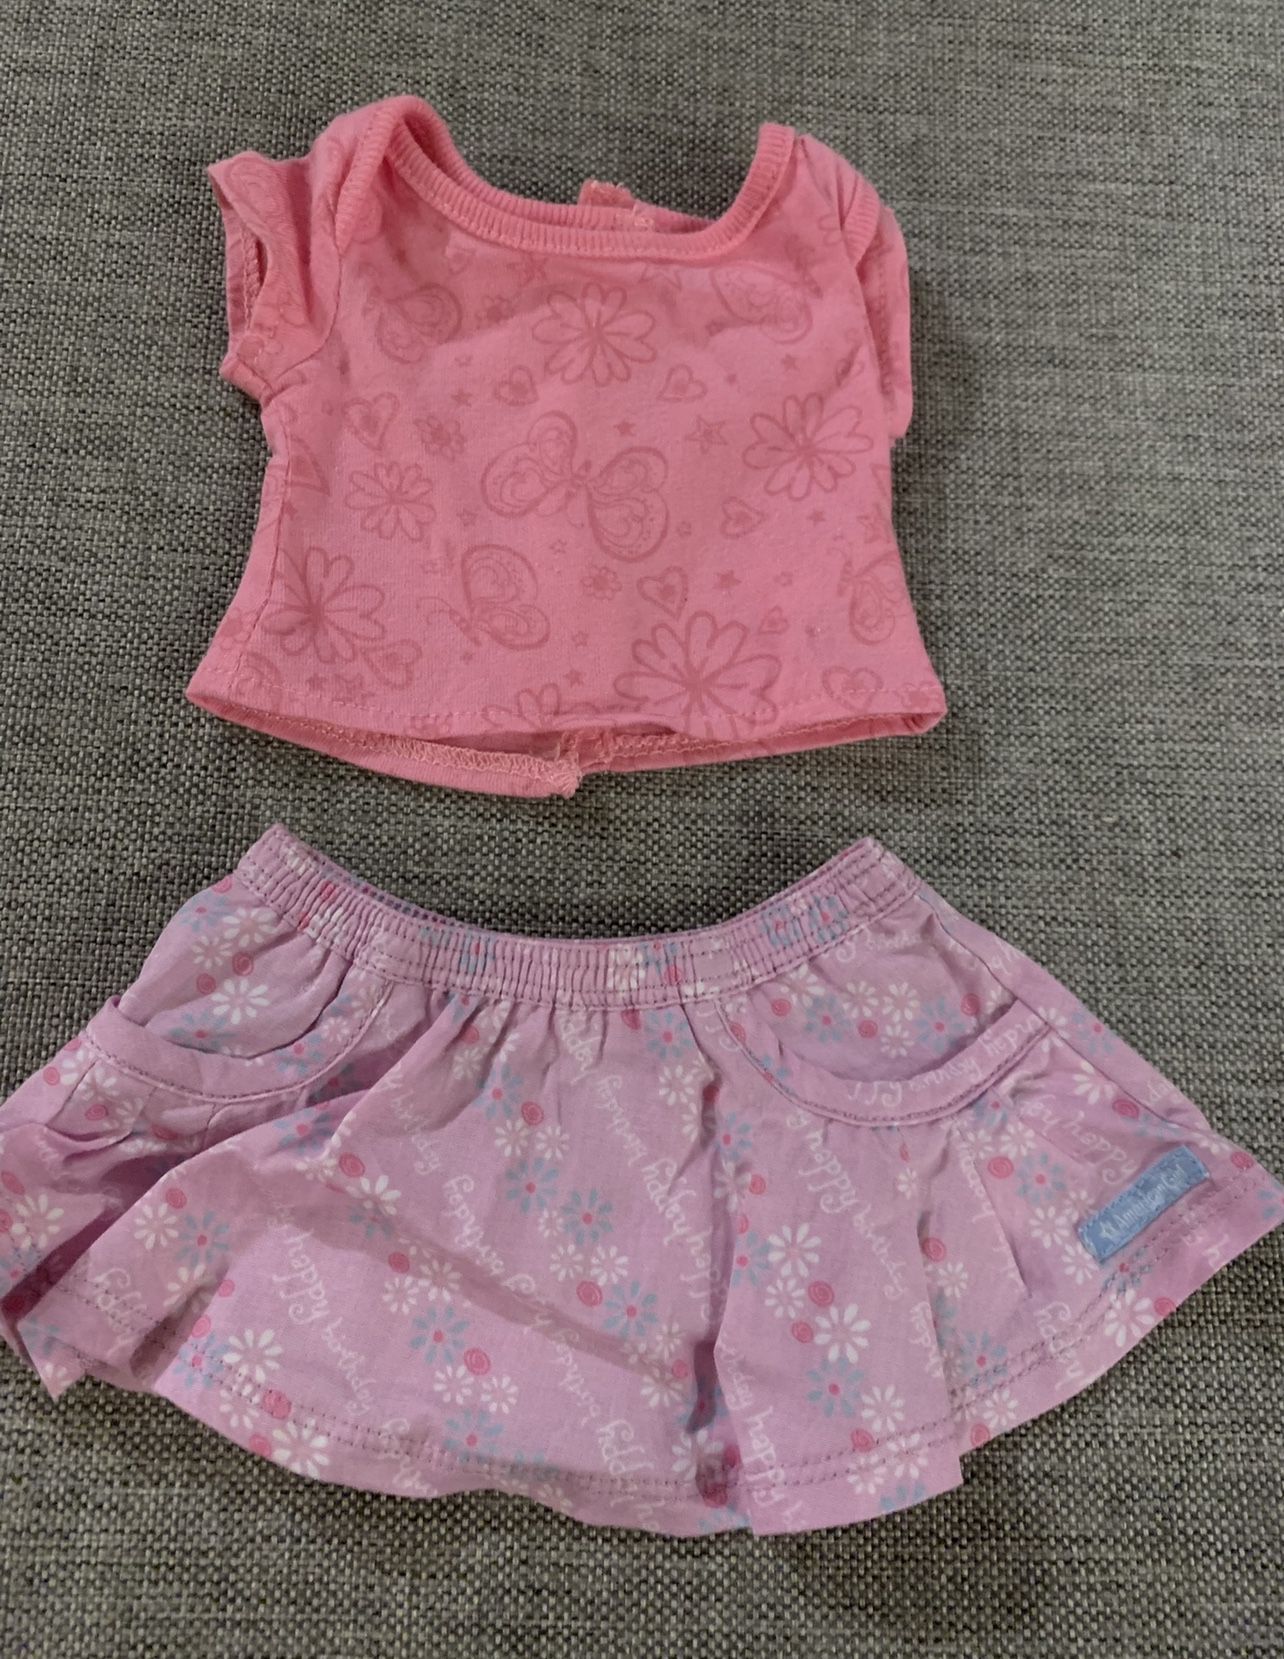 American Girl Doll Outfit Set Of 3 Outfits With Shoes 